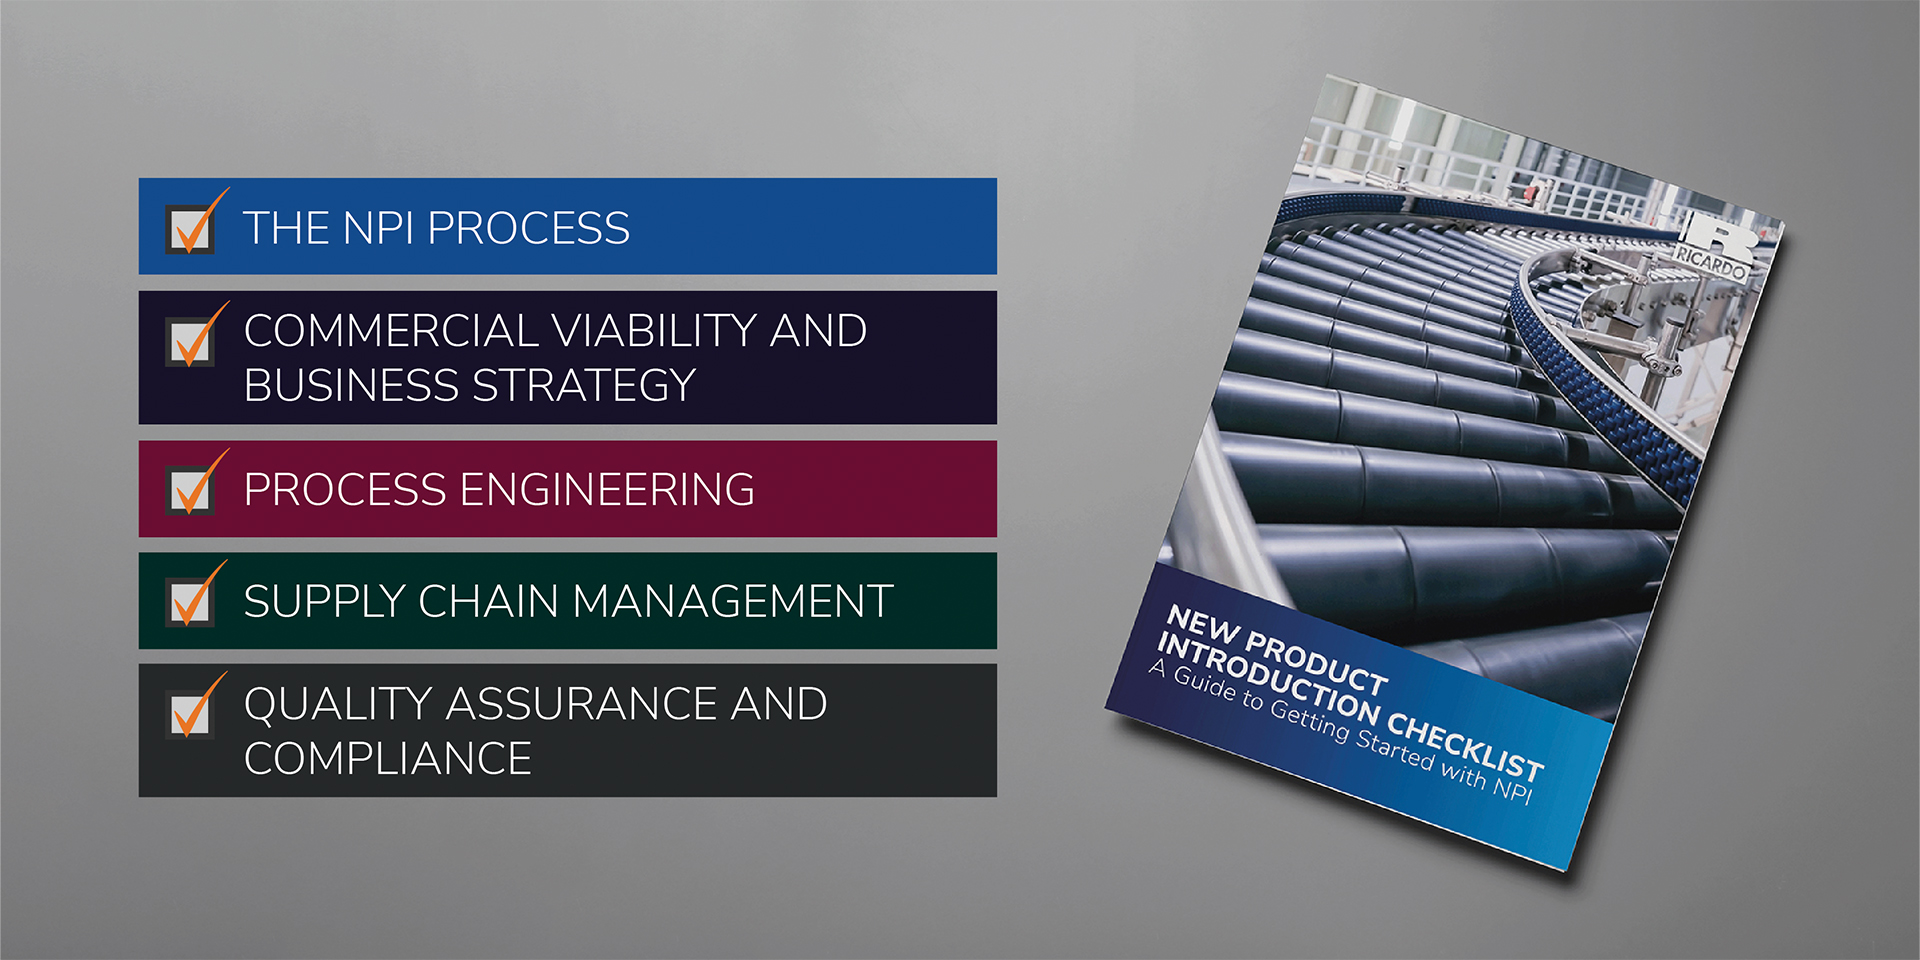 The npi checklist covers the npi process, process engineering, commercial viability and business strategy, supply chain management and quality assurance and compliance